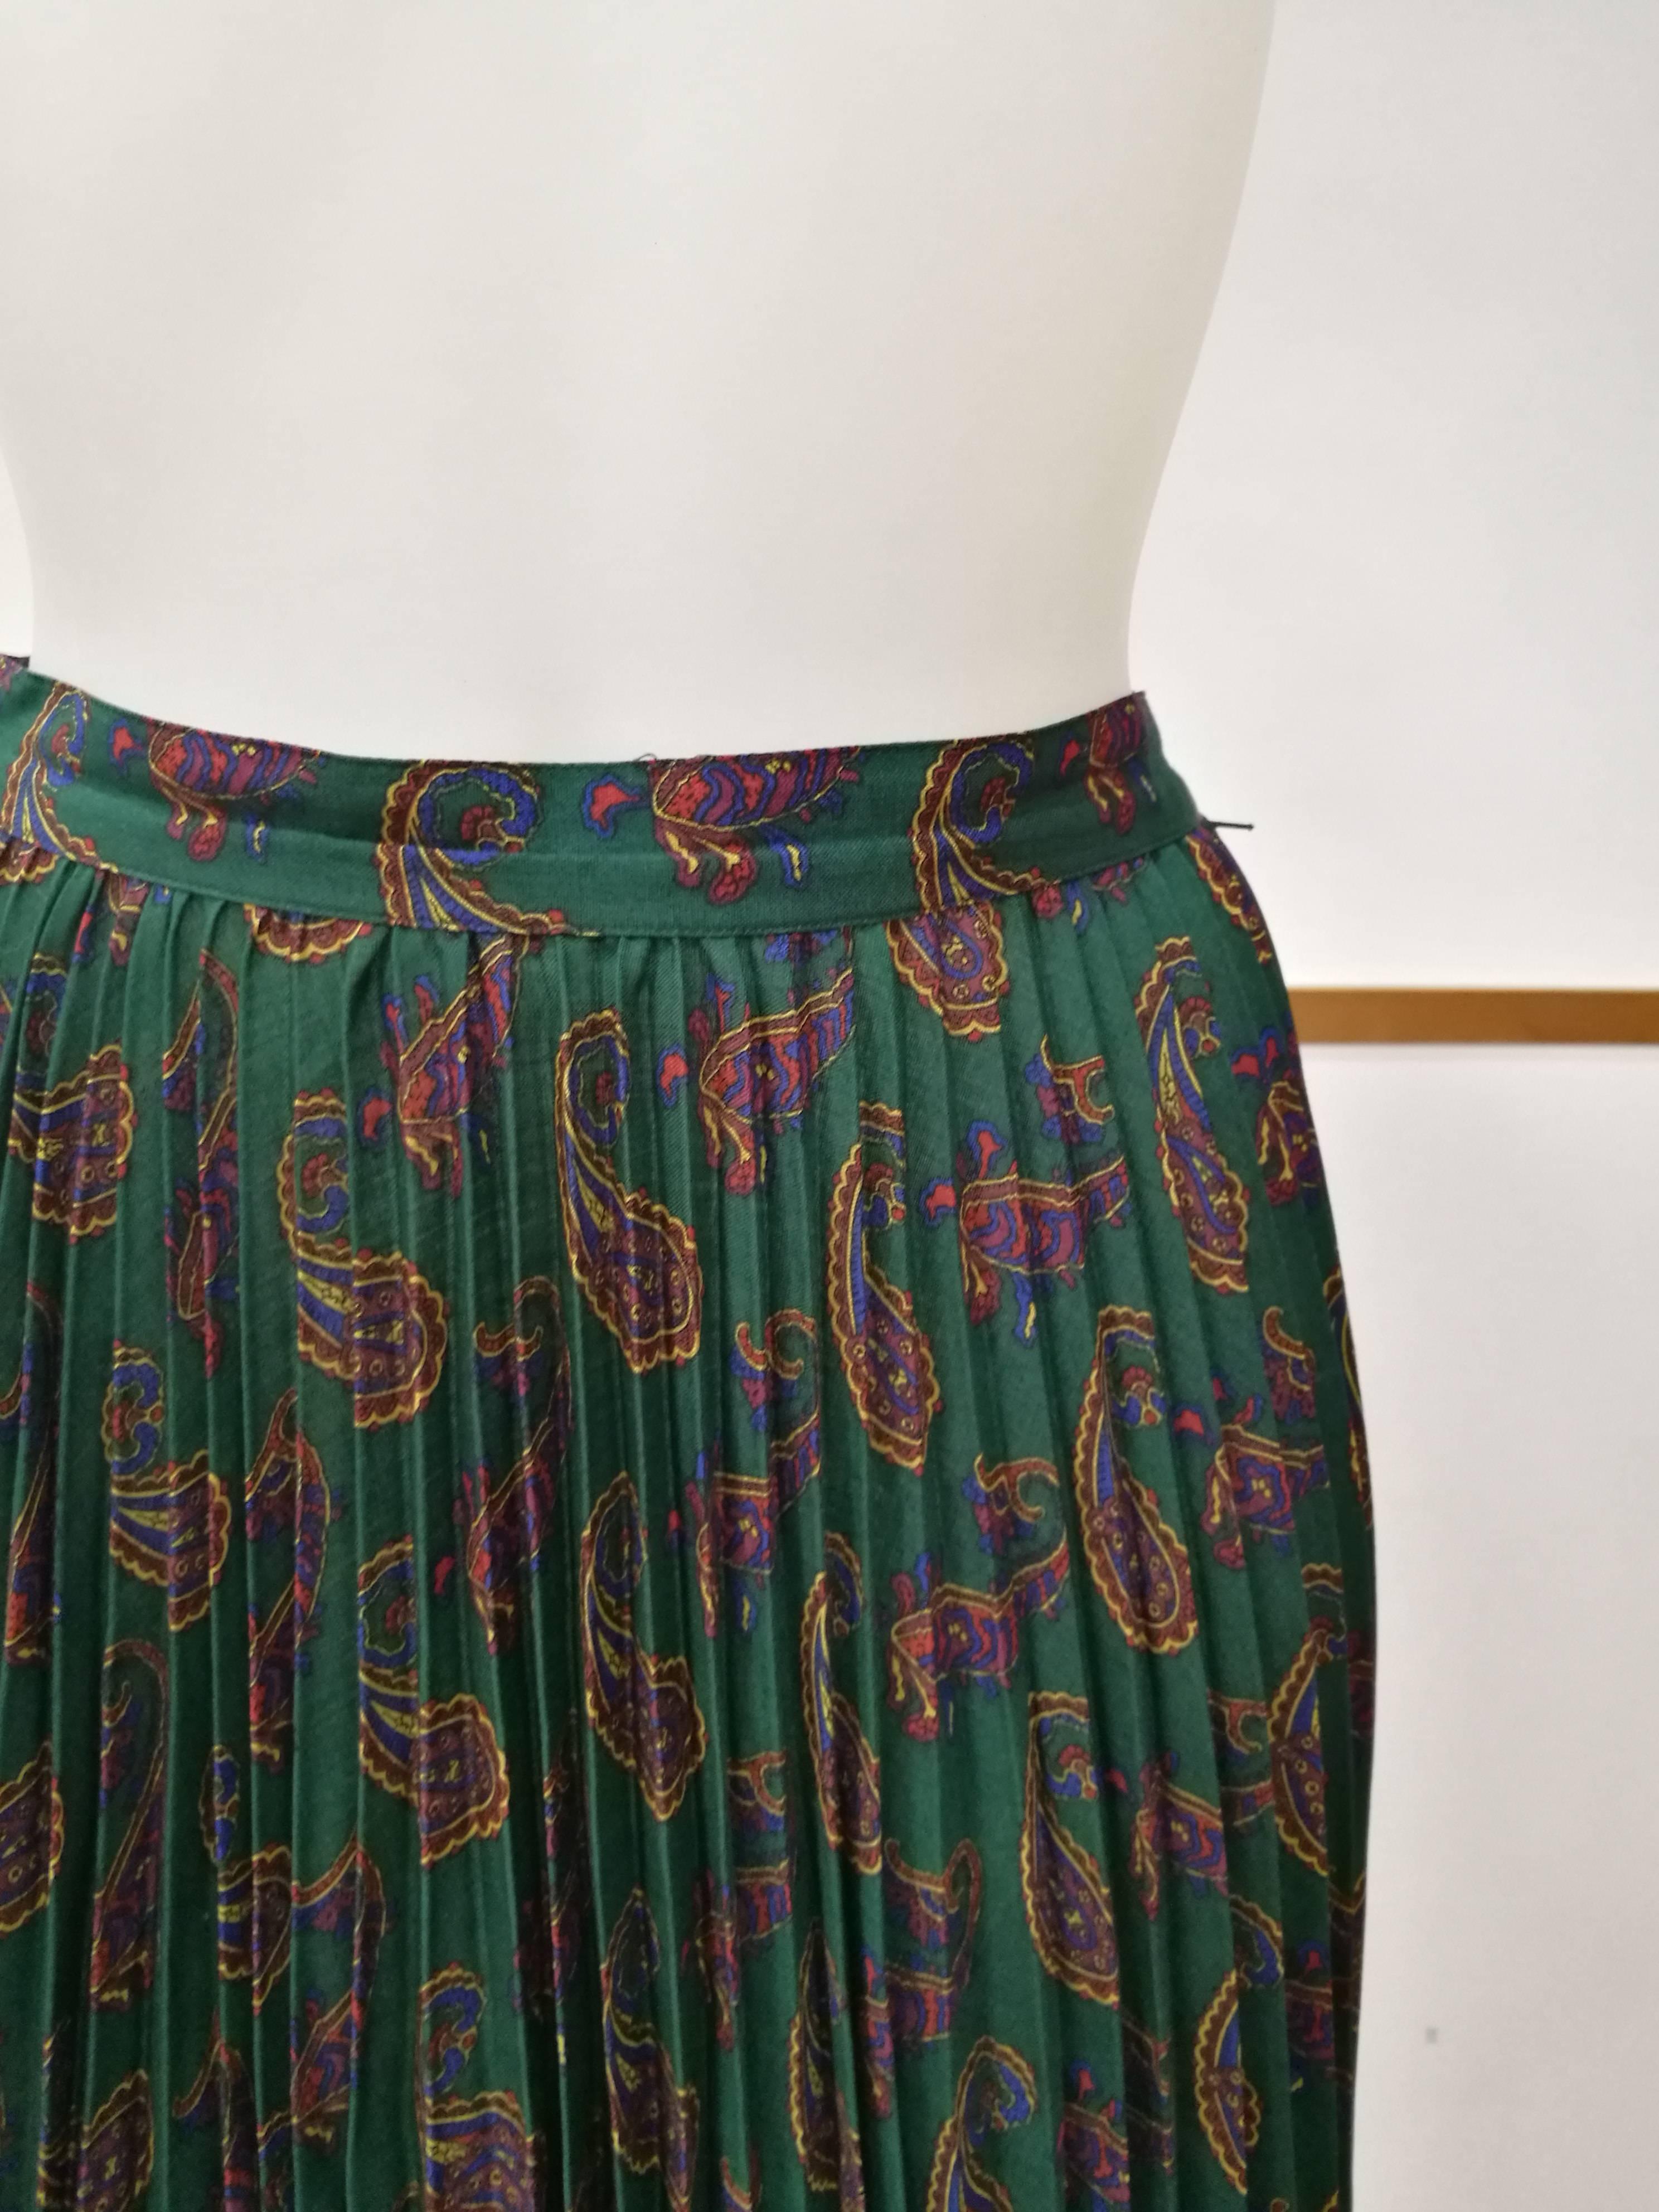 1980s Cacharel Plisset Green Skirt

Totally made in italy in italian size range 38

Composition: Wool